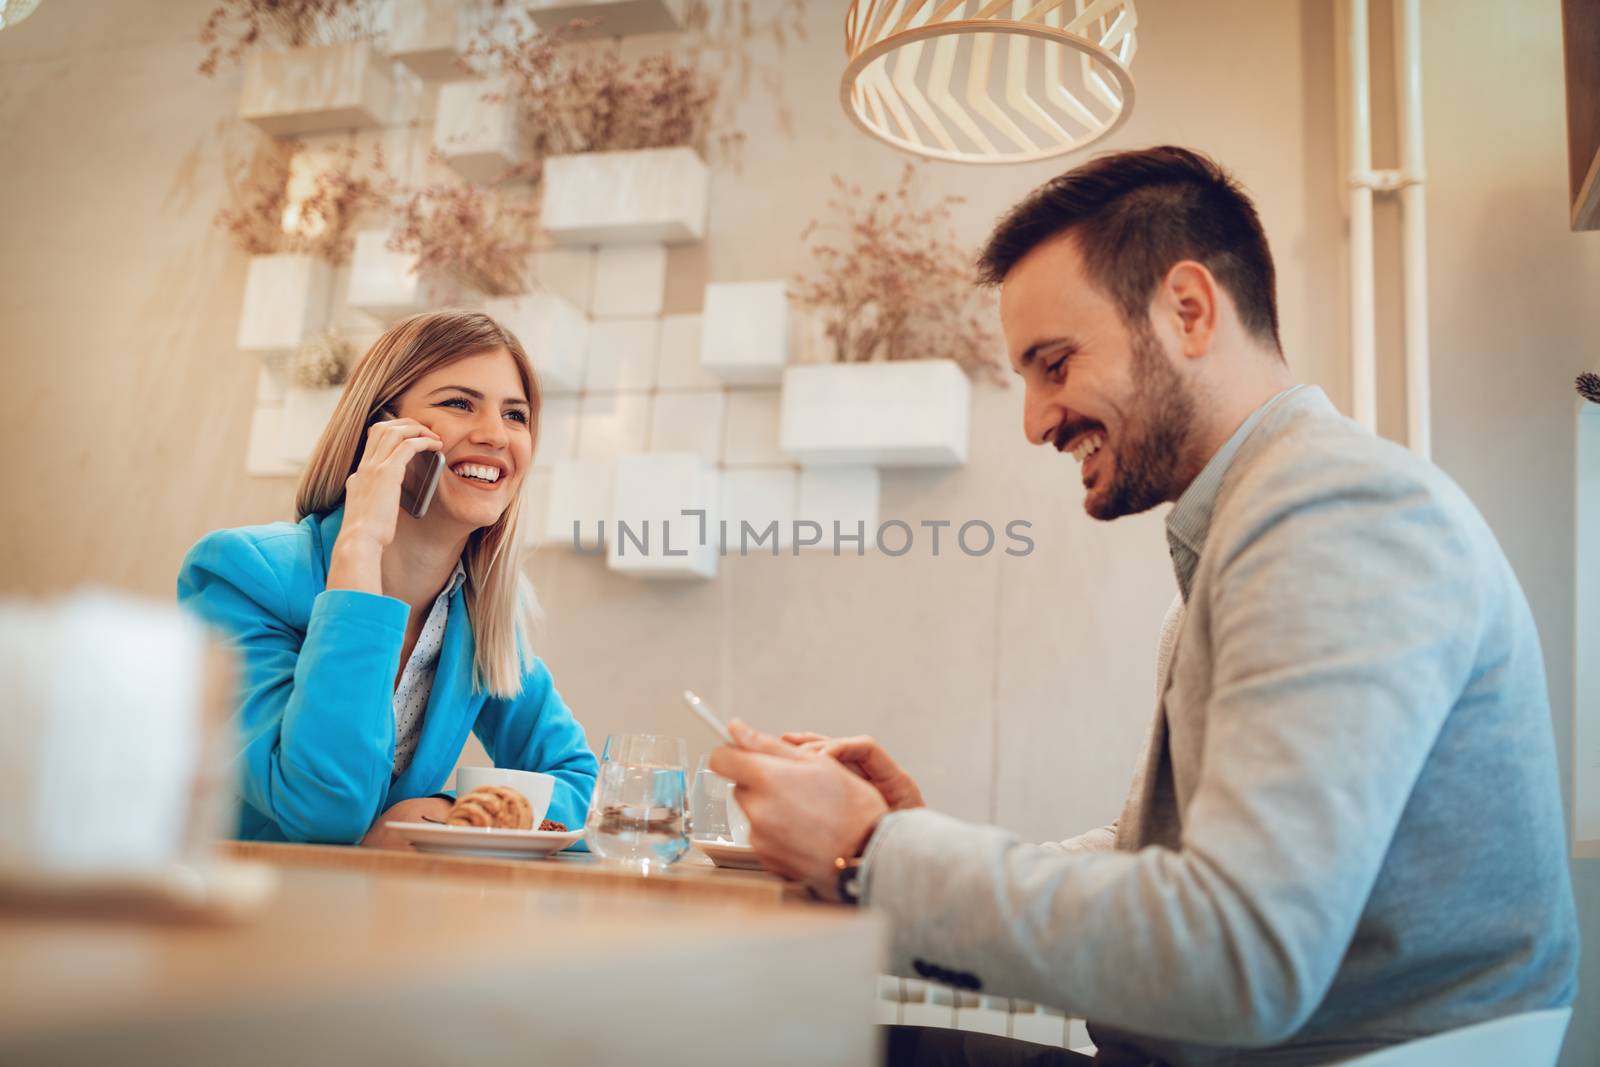 Young businesspeople on a coffee break in a cafe. Smiling woman talking on a smartphone and looking away. Man using digital tablet. Selective focus. Focus on businesswoman.